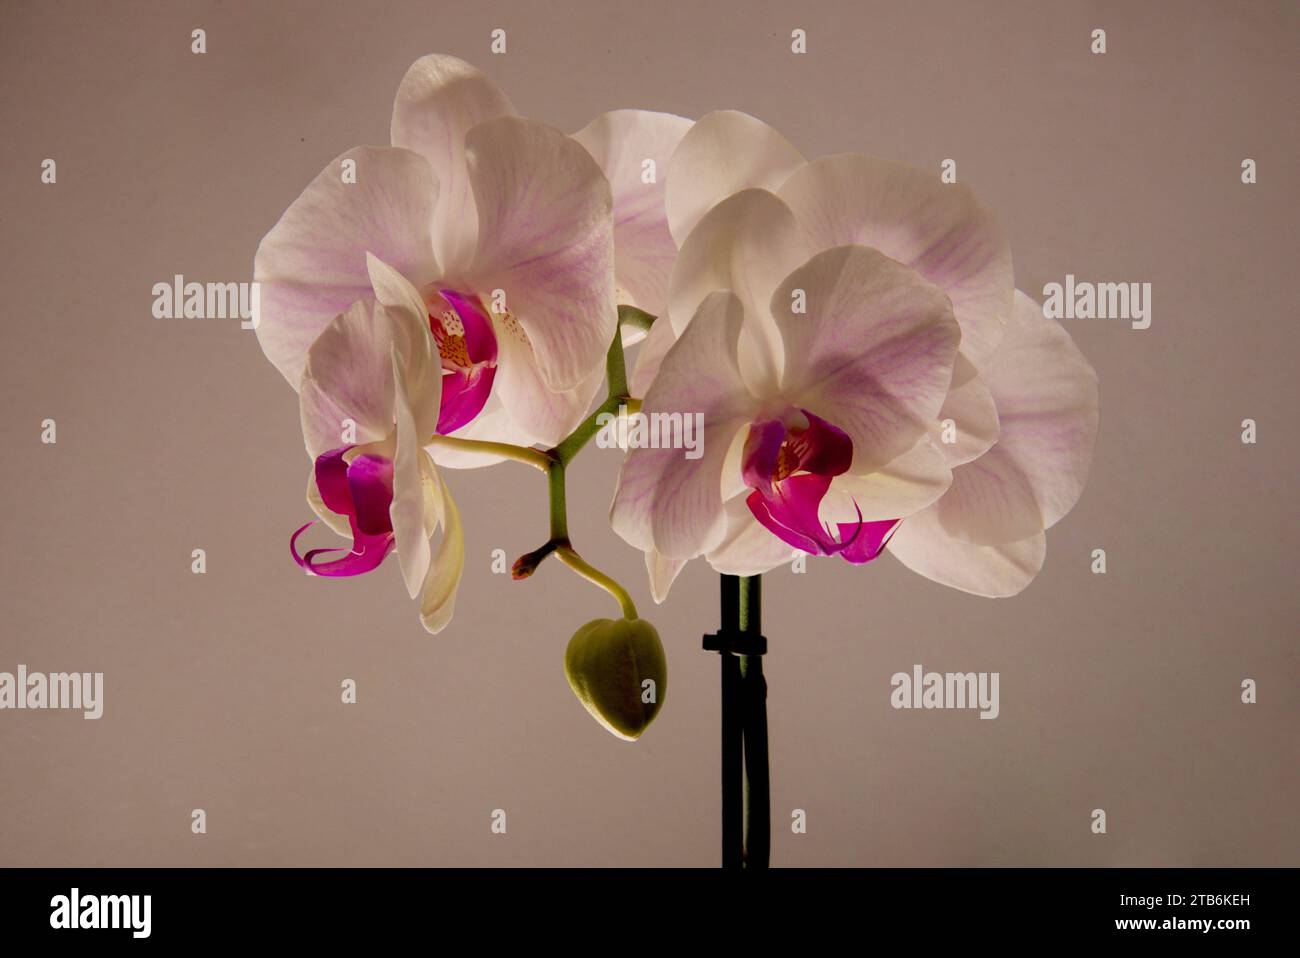 Vibrant orchid flowering plant radiating  beauty, color & life. Pretty white petal with blue veins, and multi-colored stamen attraction attention Stock Photo